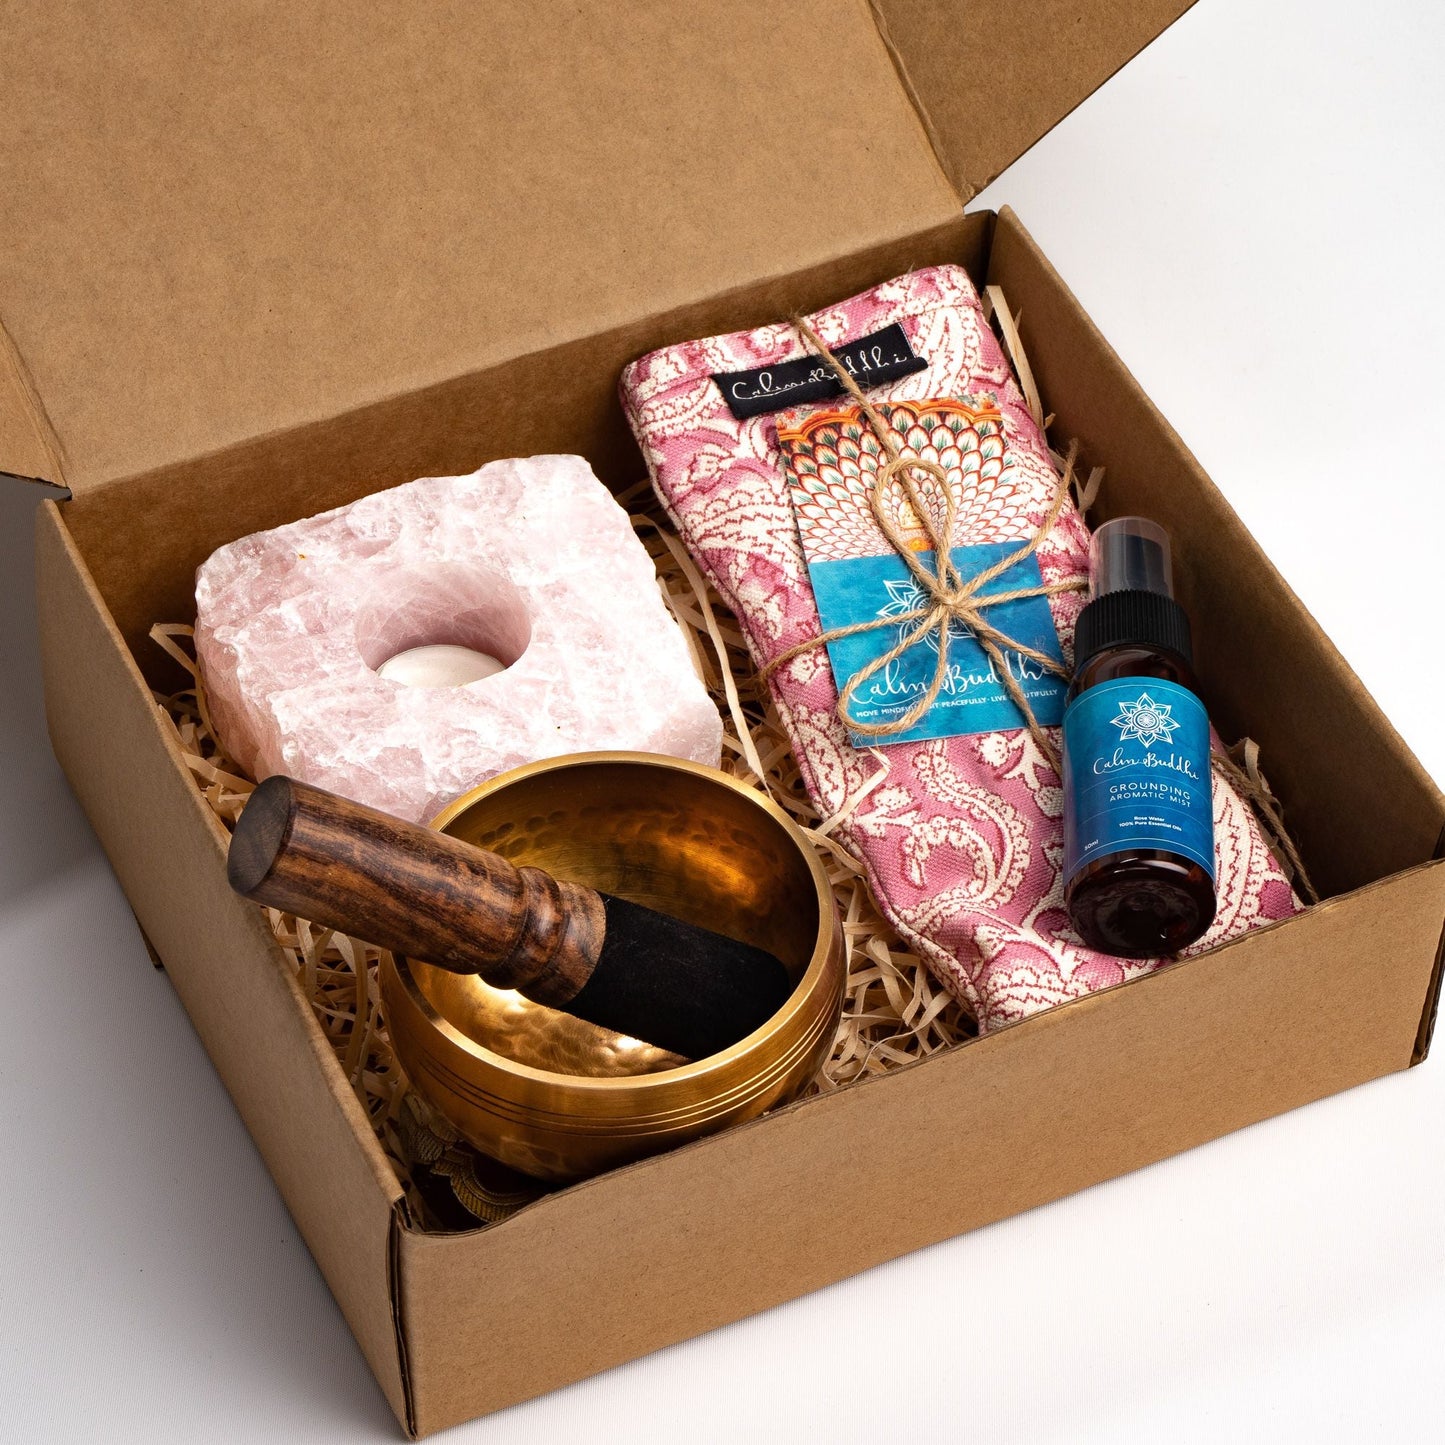 One Month Unlimited Yoga Gift Box - Inlet Yoga Studio